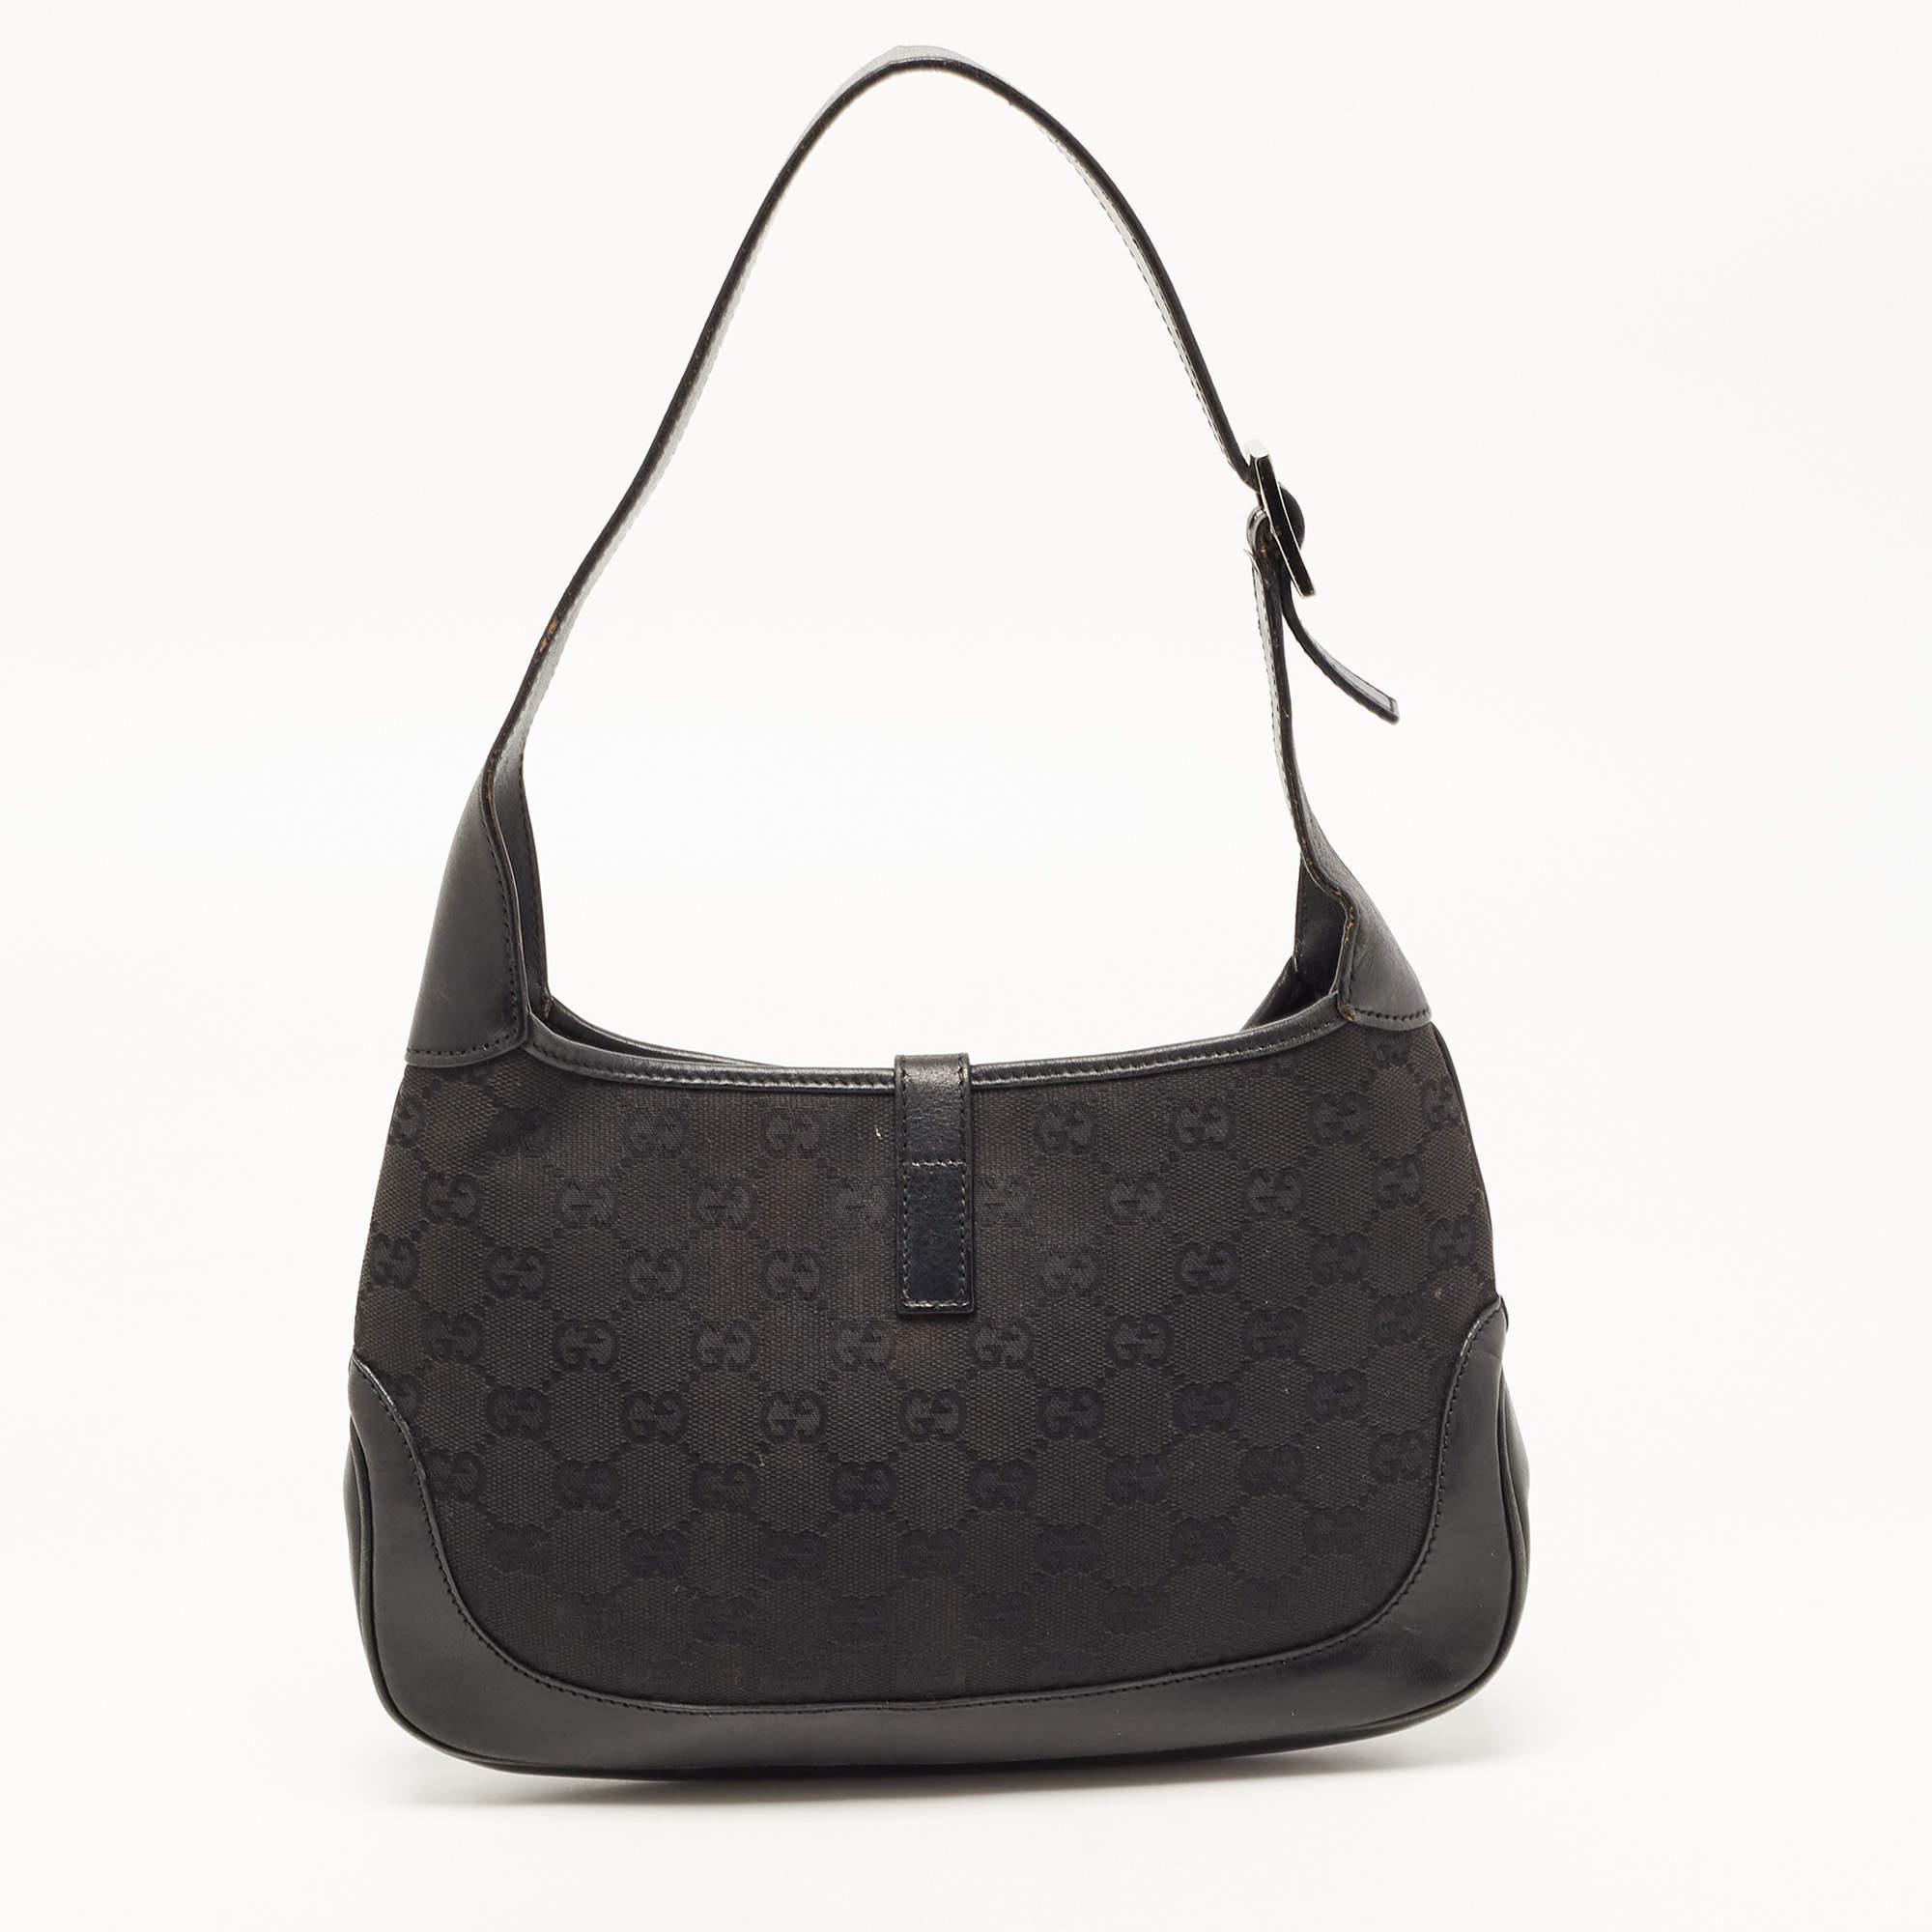 This Gucci Jackie O hobo is a result of blending high crafting skills with a practical design. It arrives with a durable exterior completed by luxe detailing. It is an accessory that you can count on.

